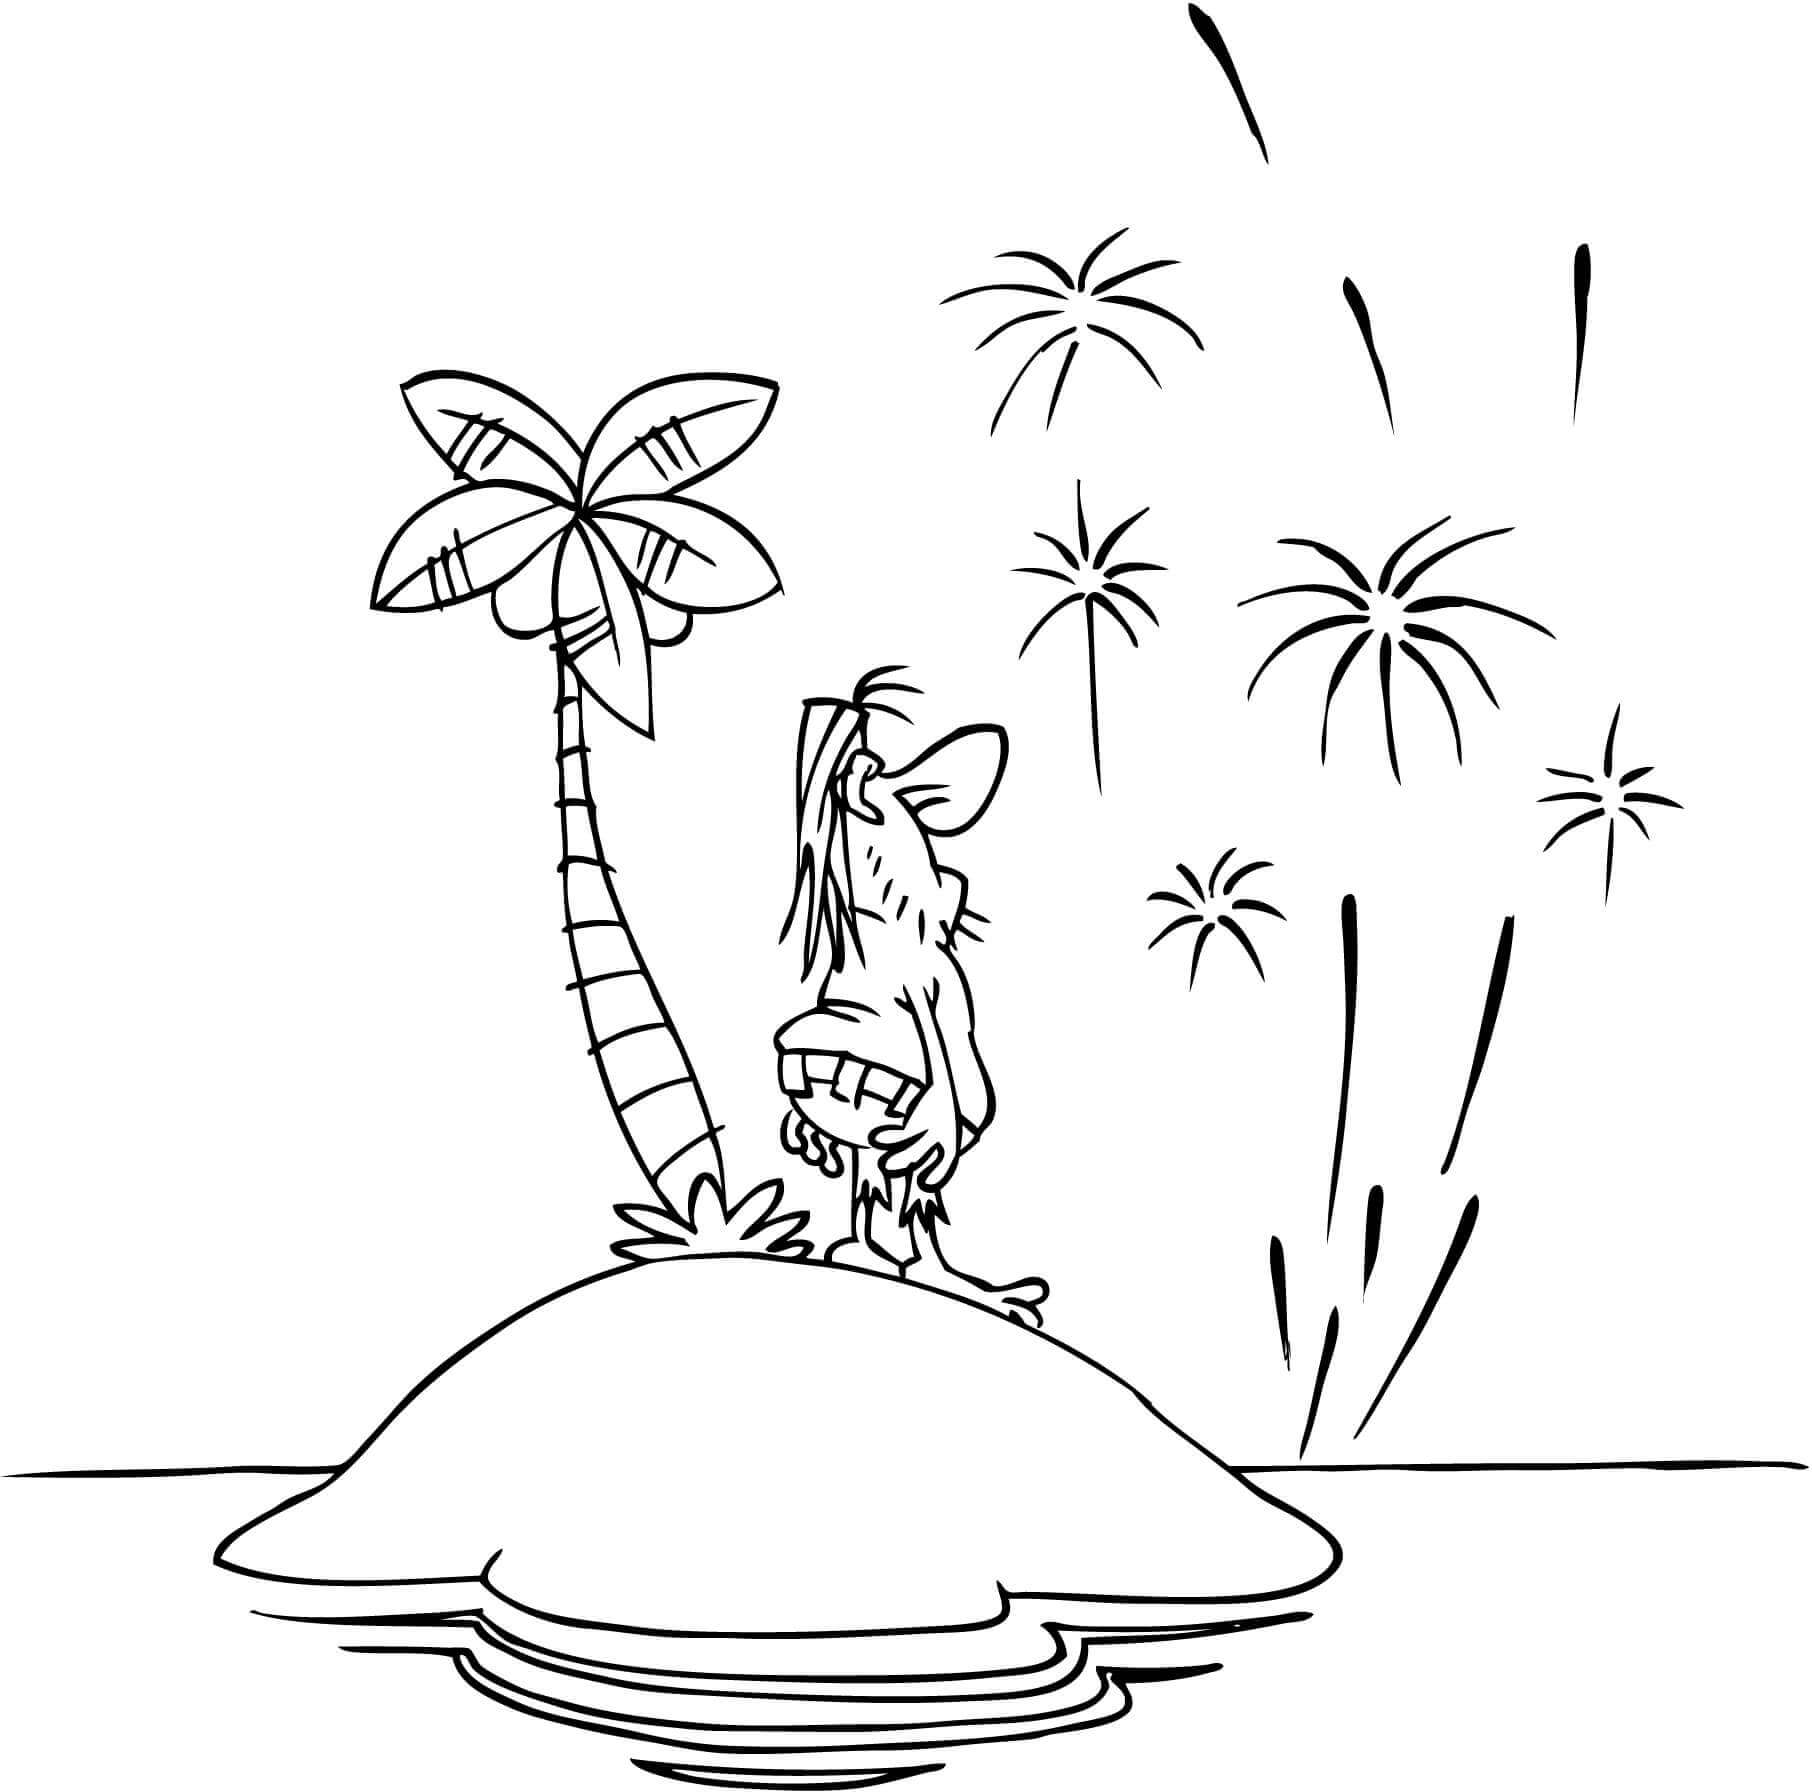 12. New Year Fireworks Coloring Page